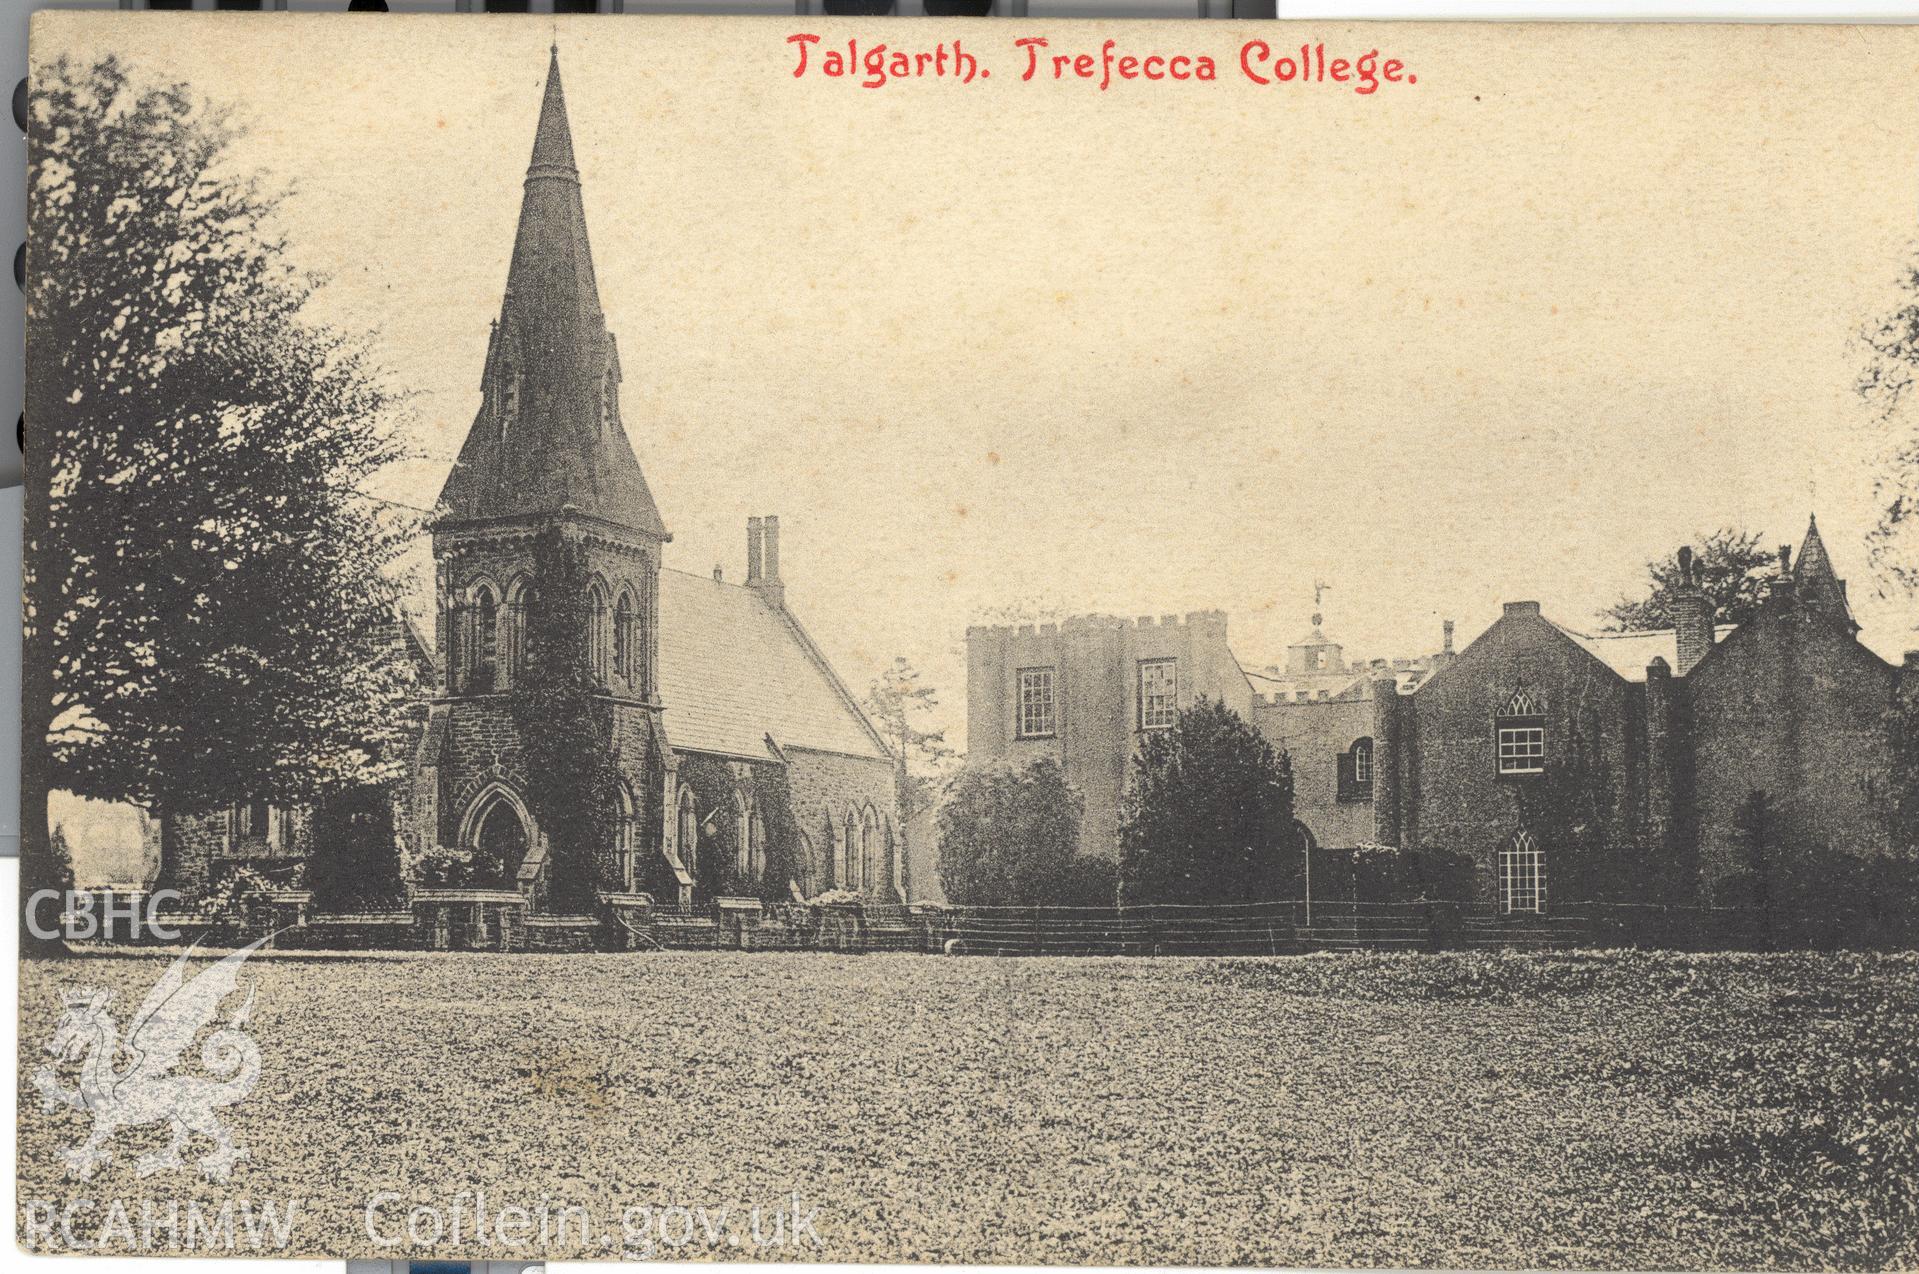 Digitised postcard image of Trefecca College, Talgarth, Park, Newtown. Produced by Parks and Gardens Data Services, from an original item in the Peter Davis Collection at Parks and Gardens UK. We hold only web-resolution images of this collection, suitable for viewing on screen and for research purposes only. We do not hold the original images, or publication quality scans.